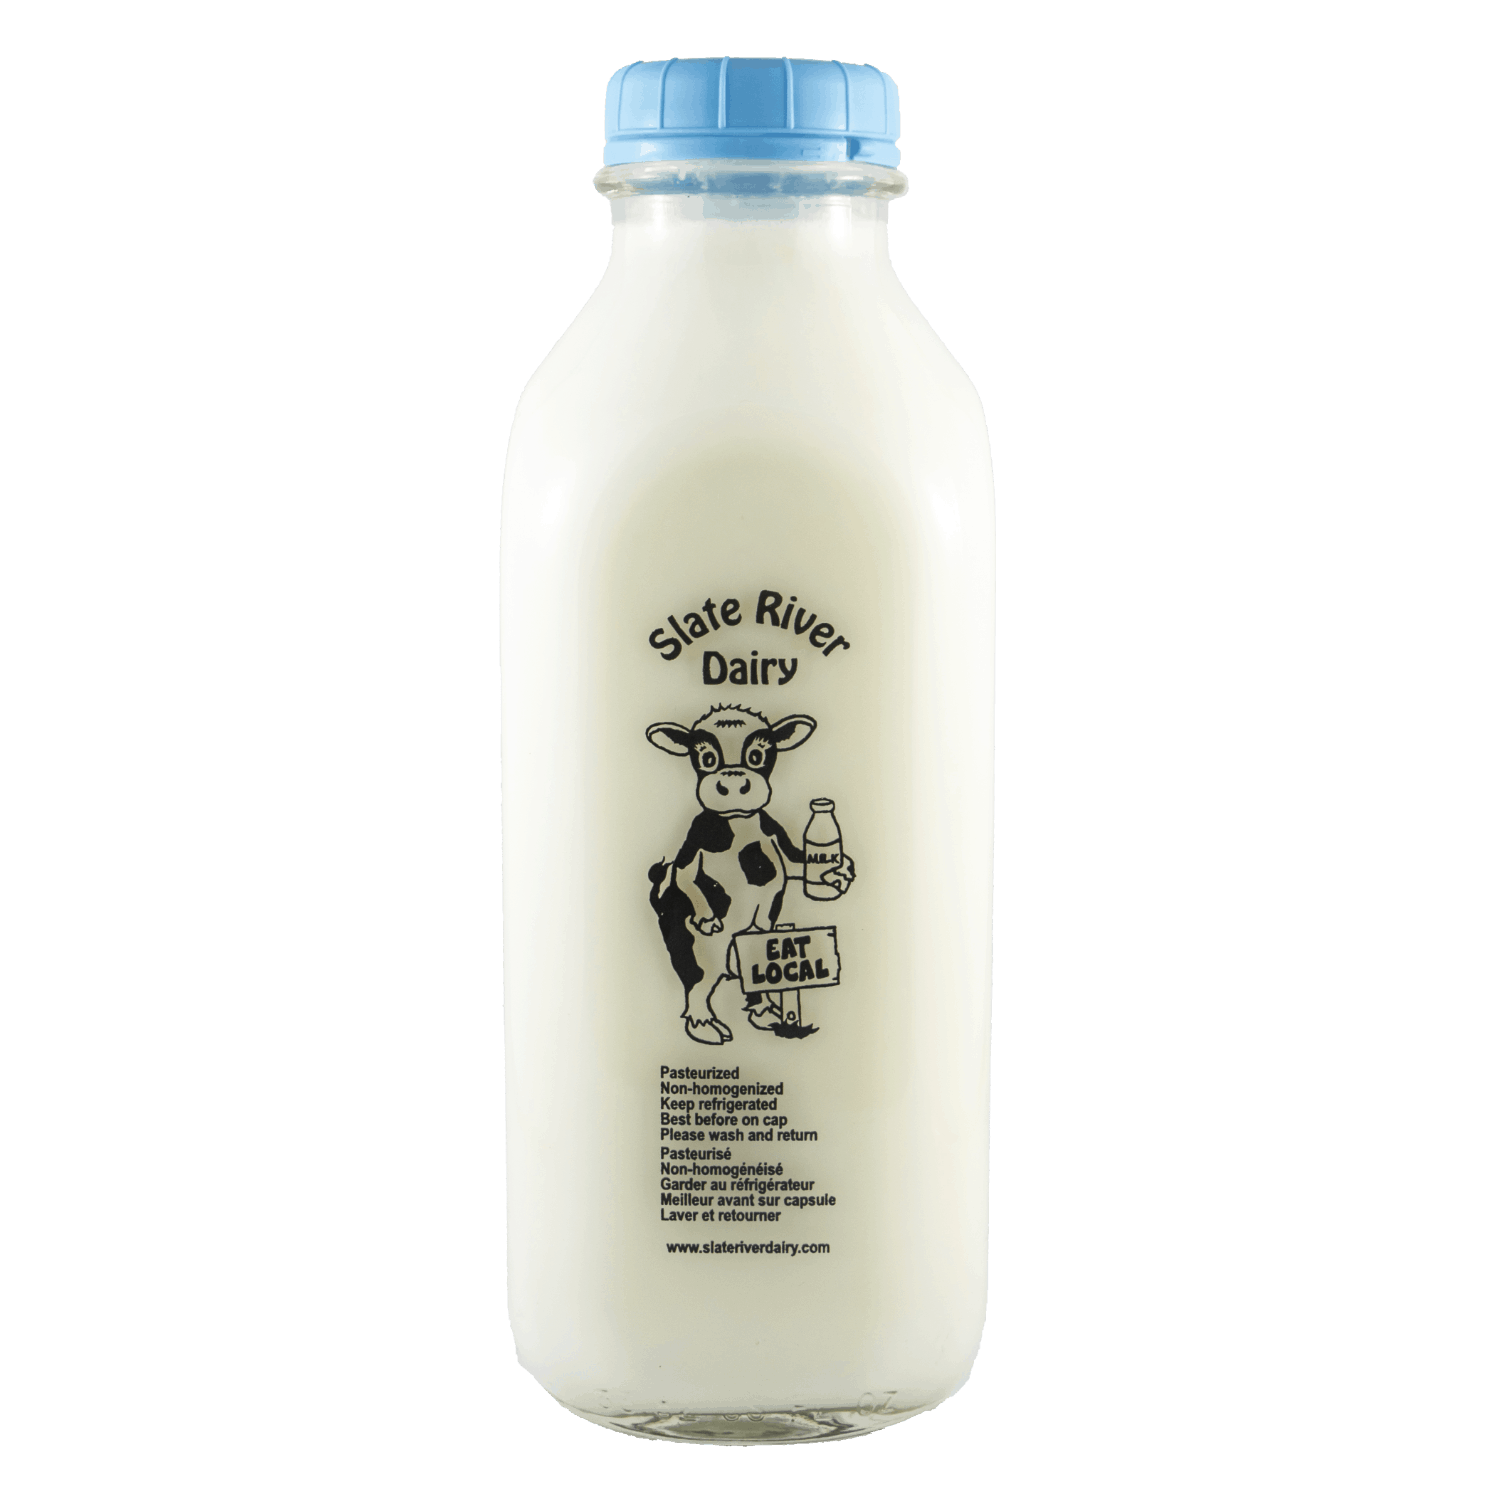 2% Milk from Slate River Dairy